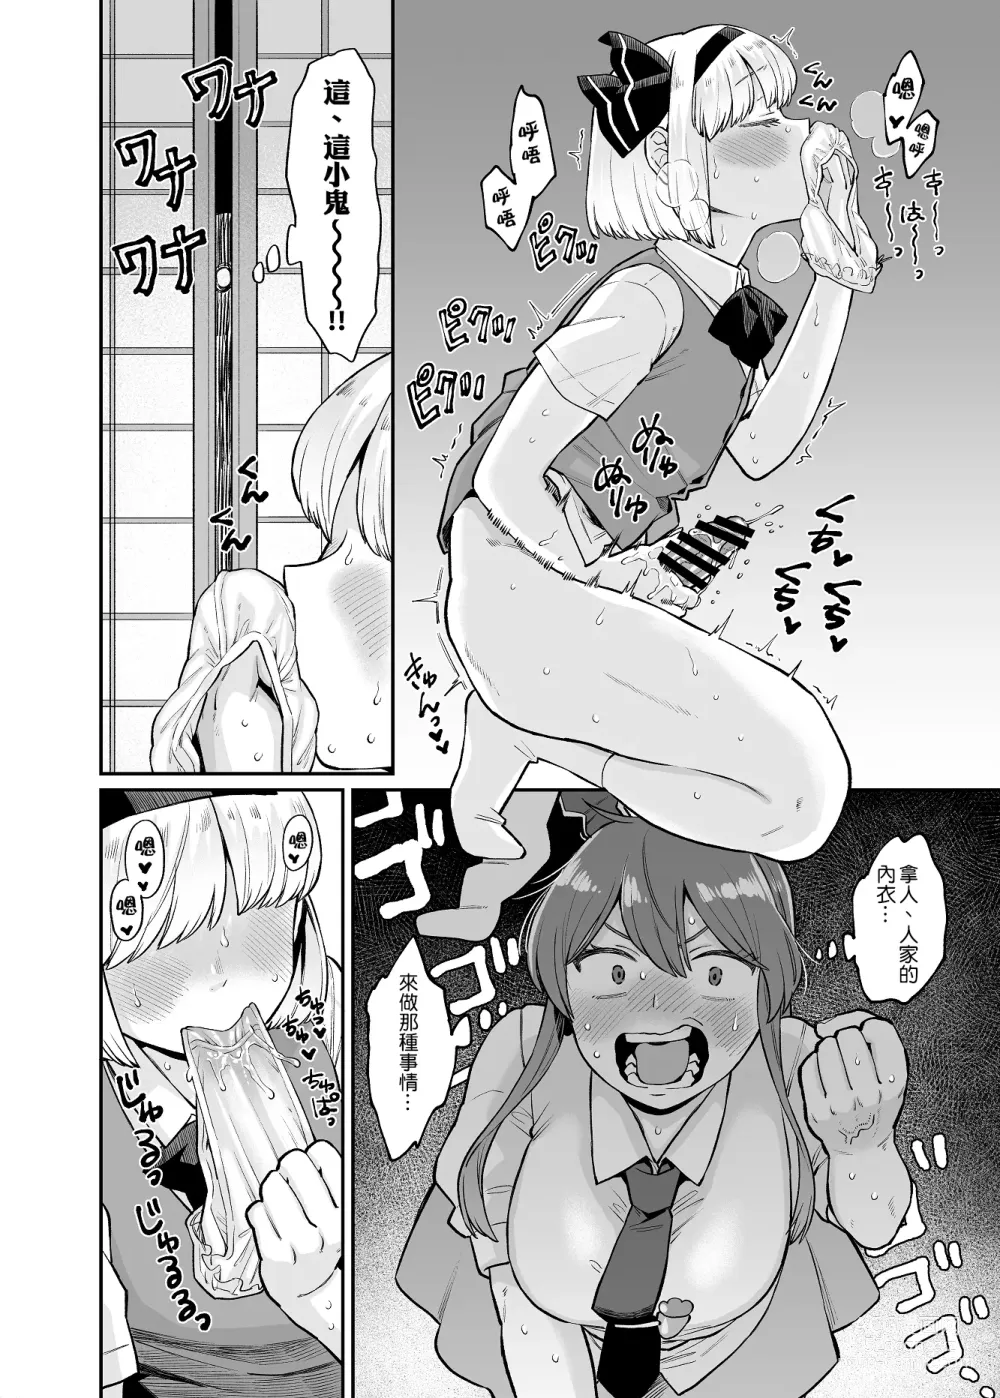 Page 8 of doujinshi 乌冬铃仙系列第1话